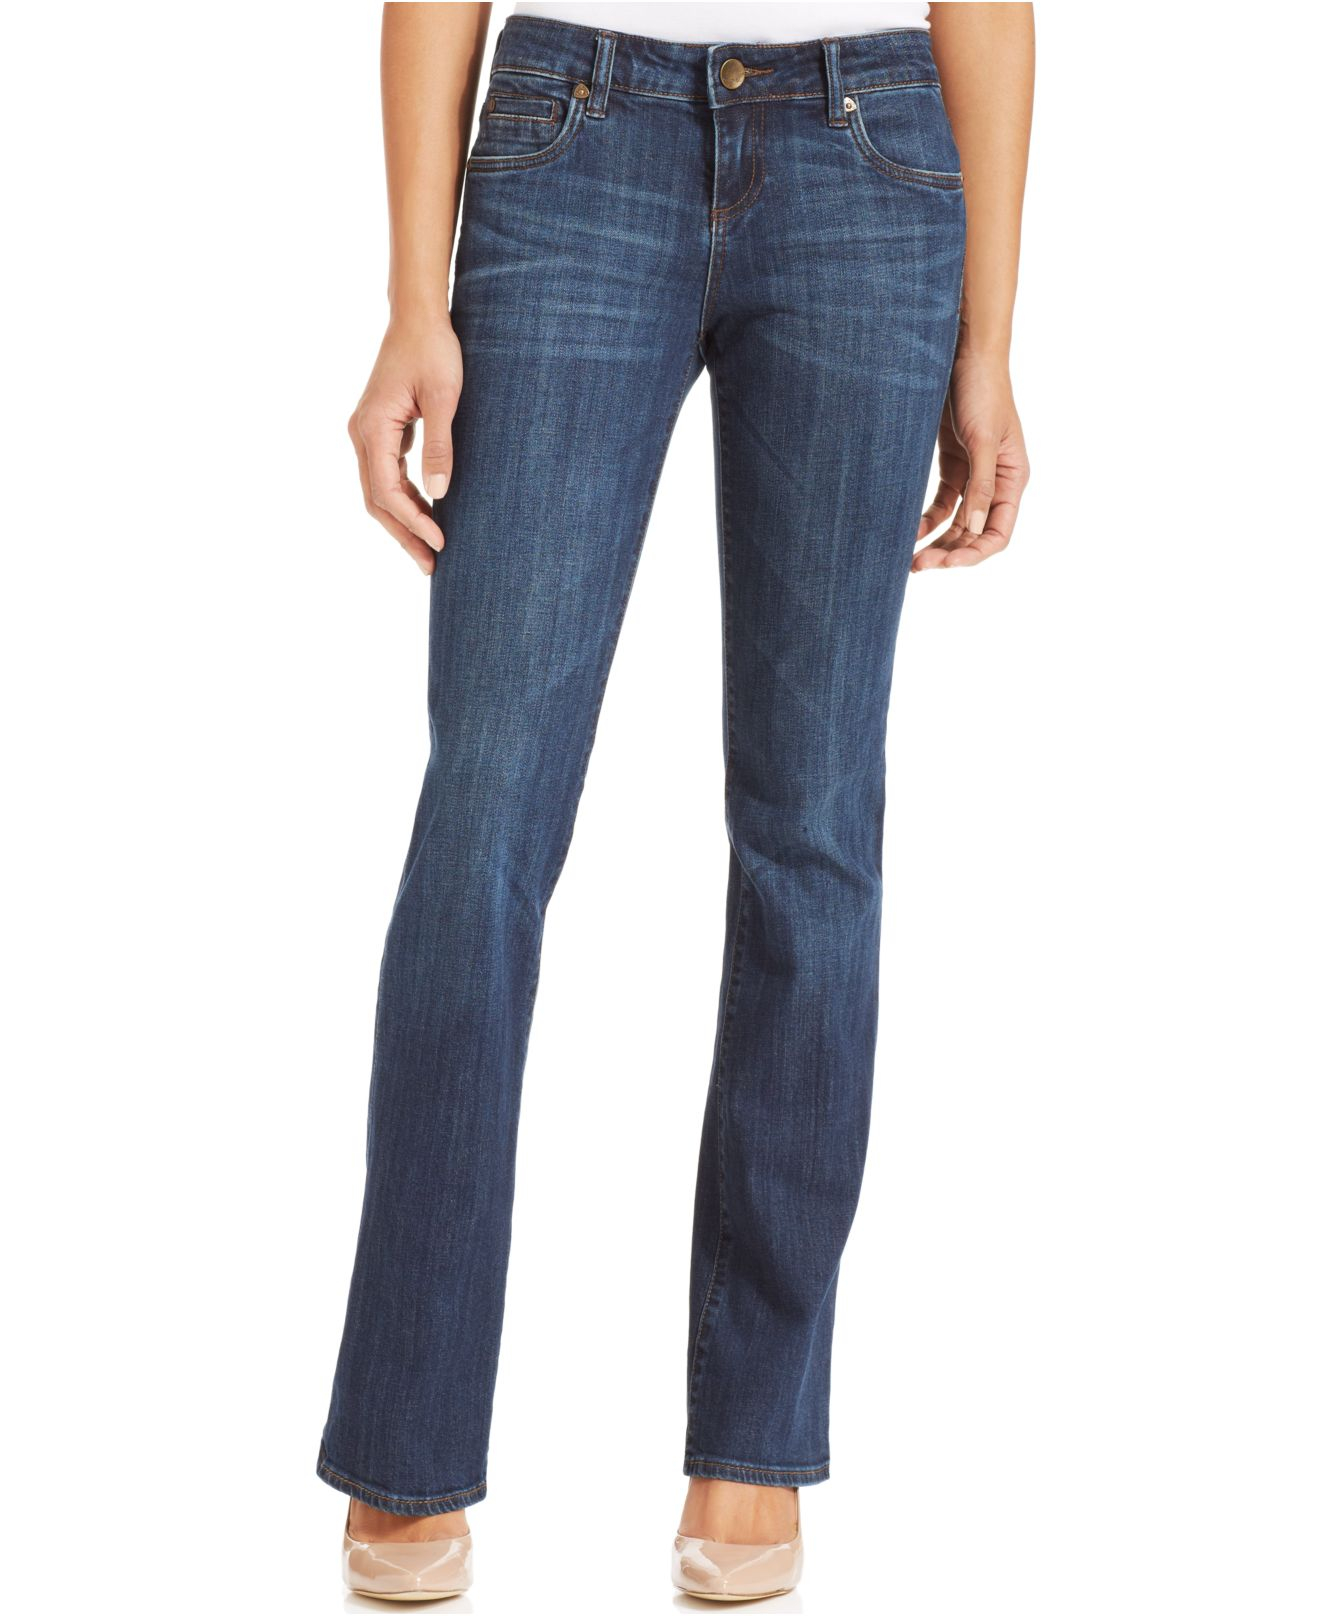 Kut from the kloth Kut From Kloth Natalie Bootcut Jeans in Blue ...